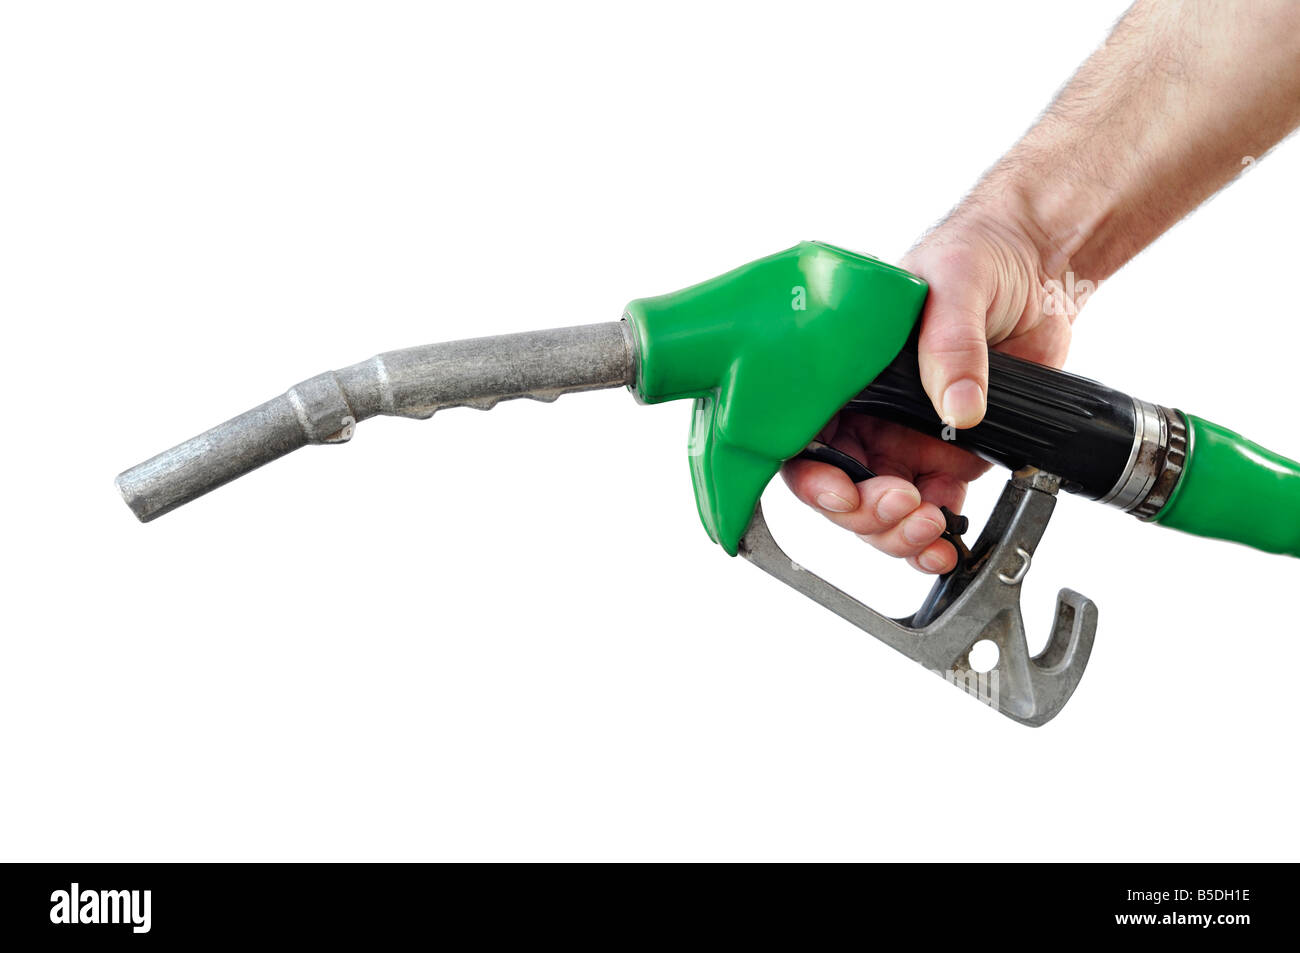 Hand Holding an Unleaded Petrol Pump Nozzle Against a White Background Stock Photo